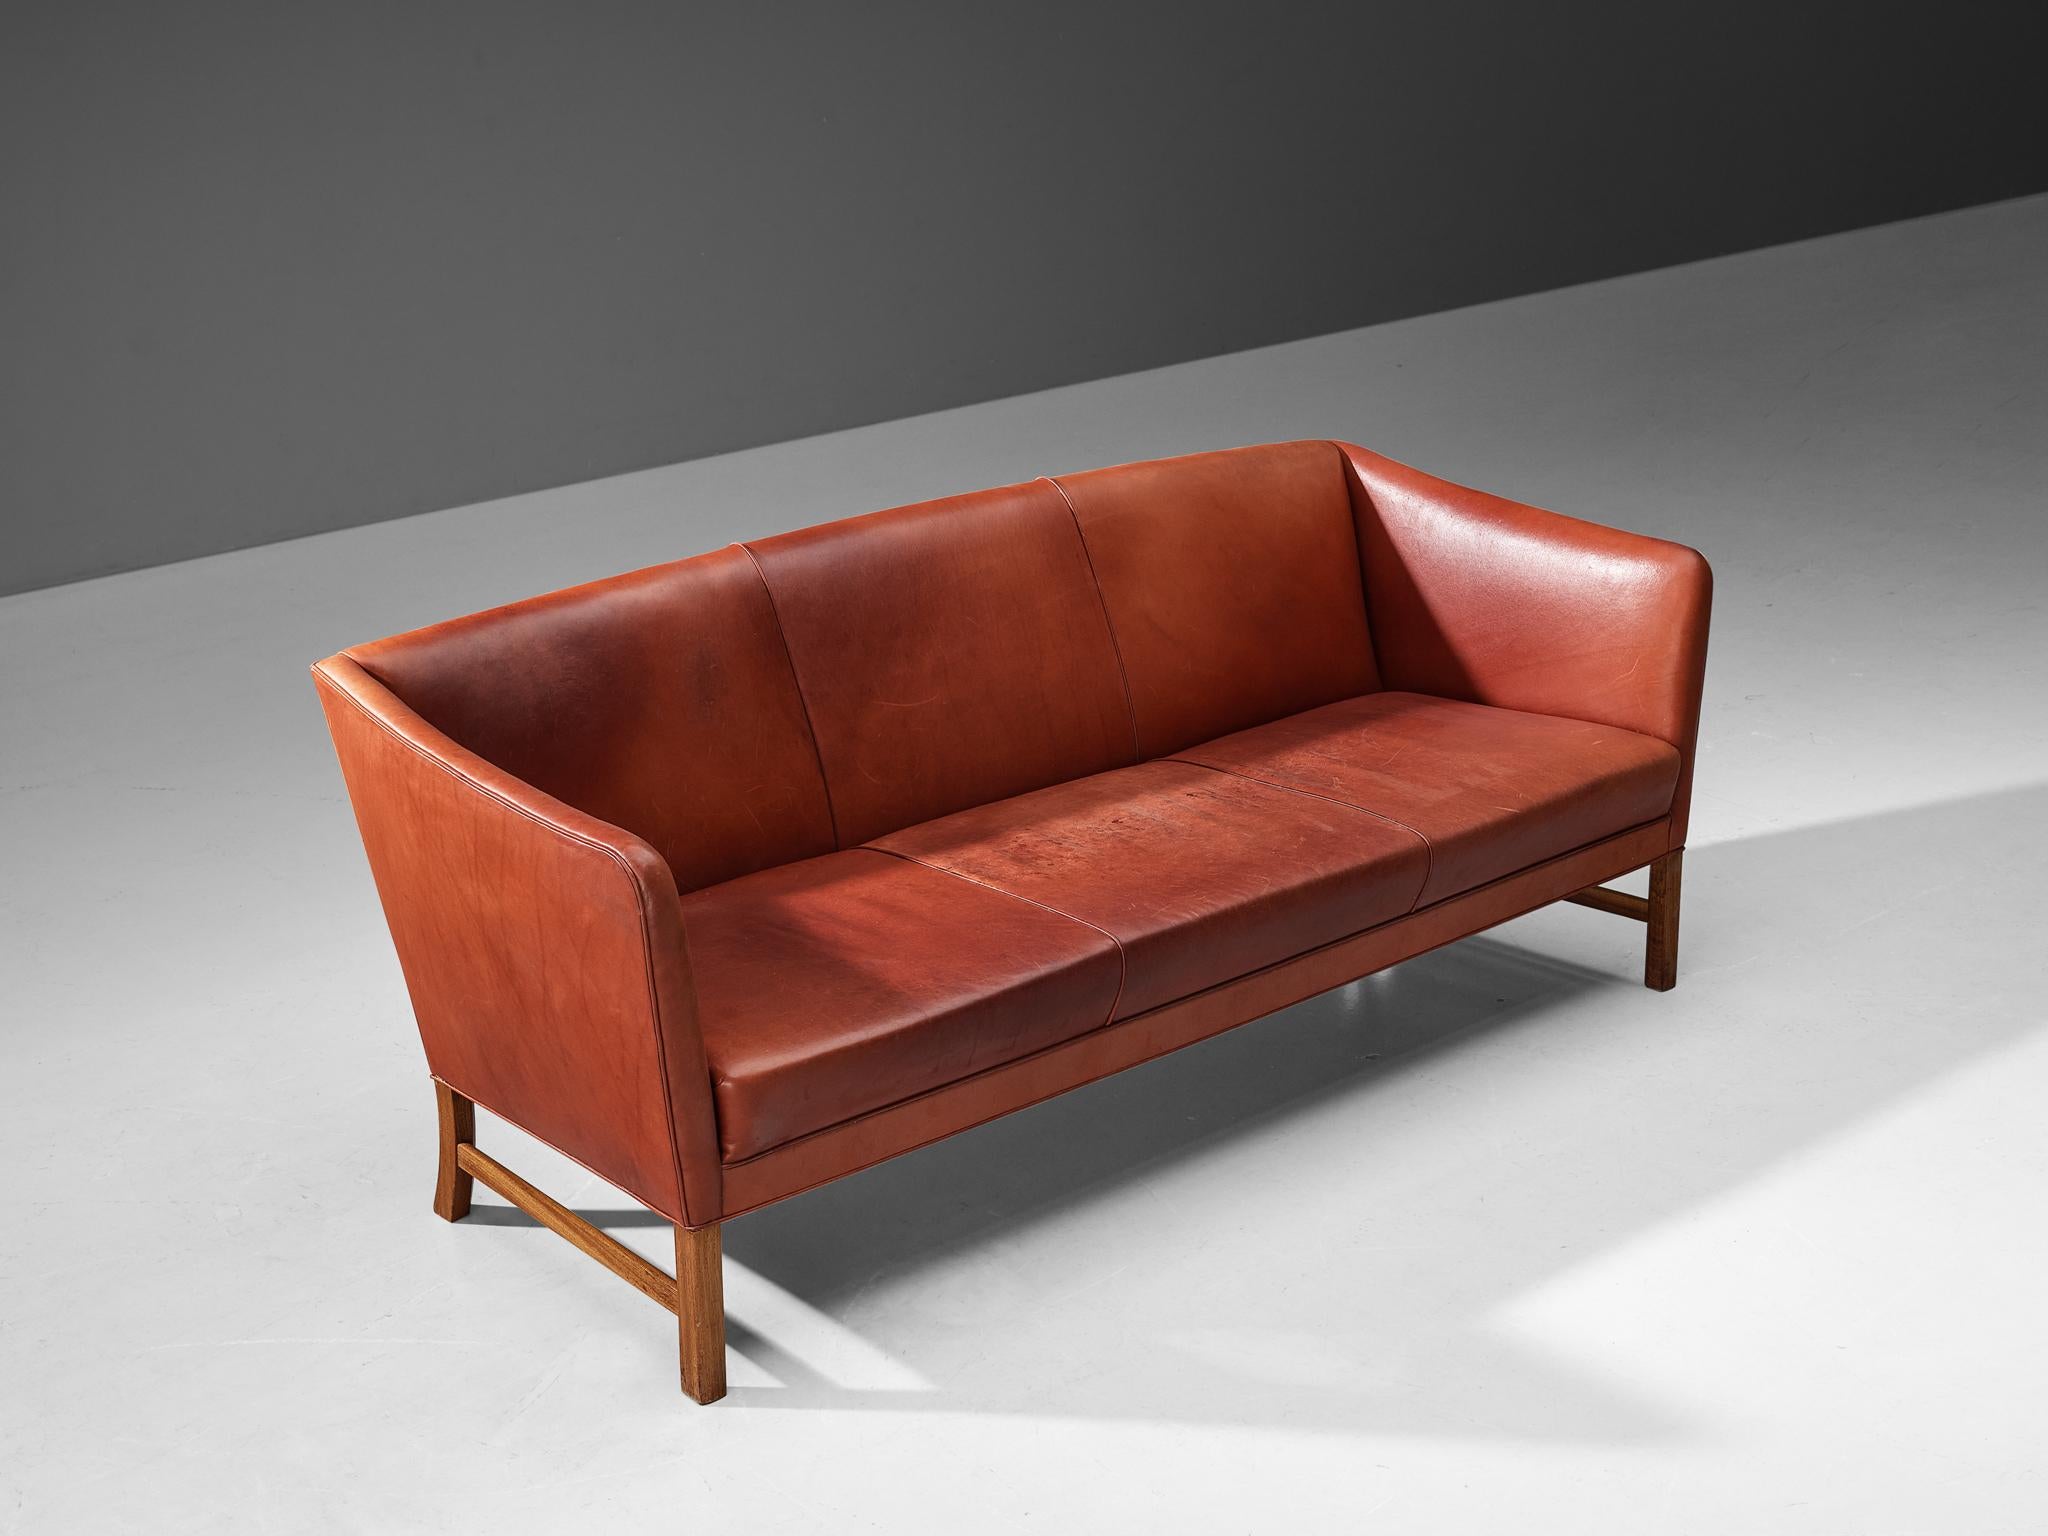 Ole Wanscher for A.J. Iverseren, sofa, leather, walnut, Denmark, 1950s/1960s

Beautiful sofa in an outstanding natural color designed by Ole Wanscher during the mid-century period. This piece is upholstered in smooth dark red leather, providing